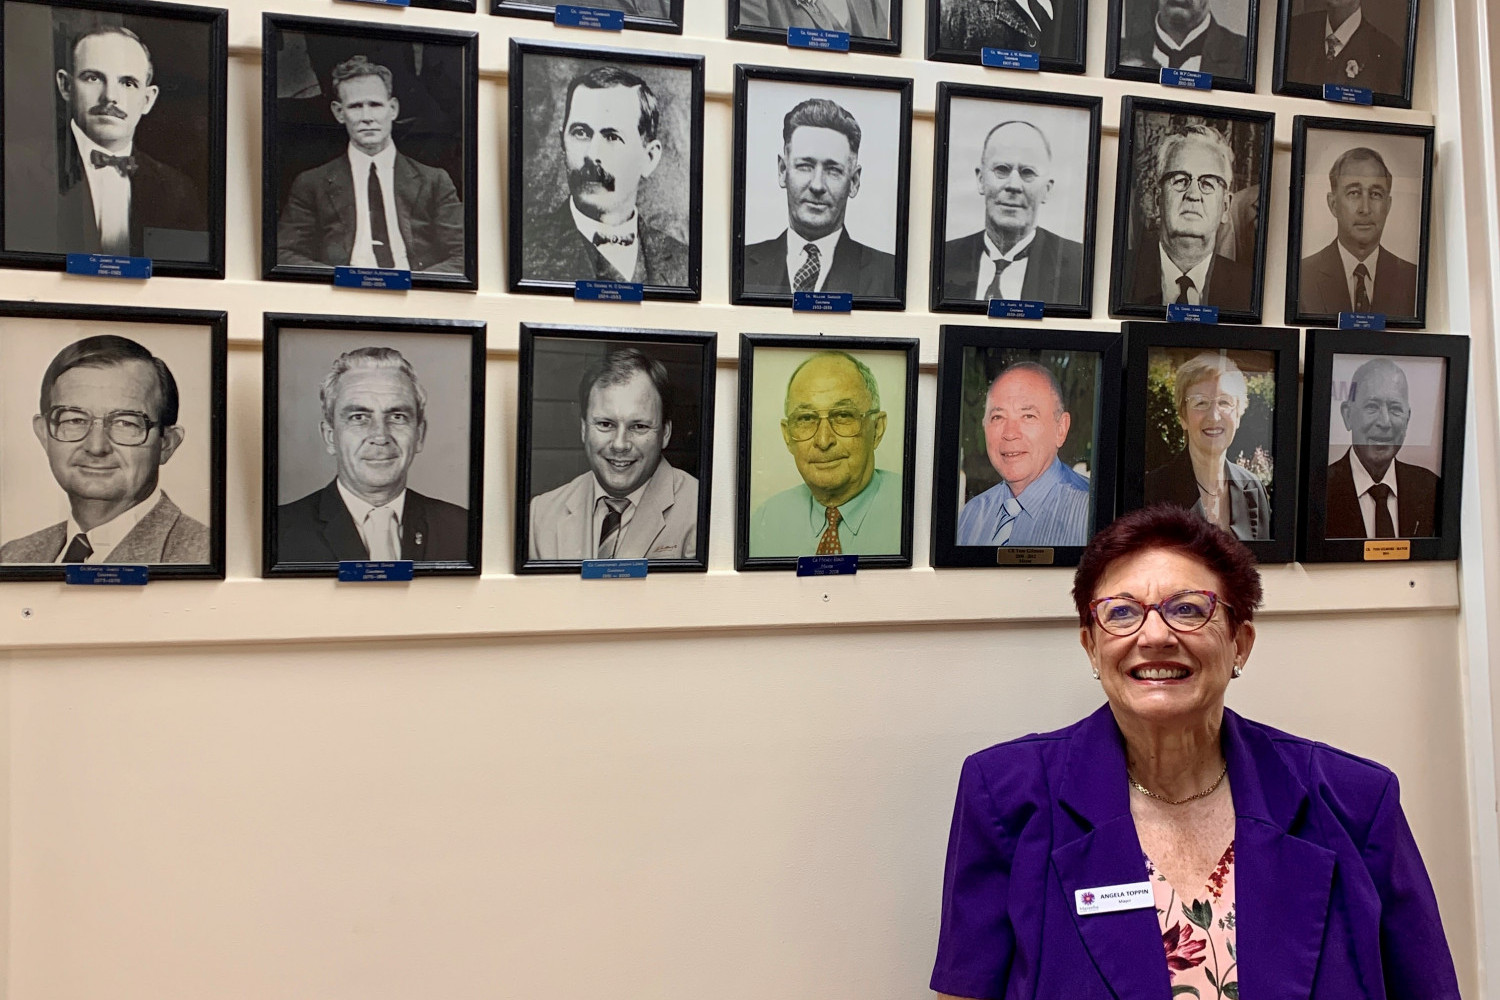 Cr Angela Toppin in front of a wall of previous Mayors.